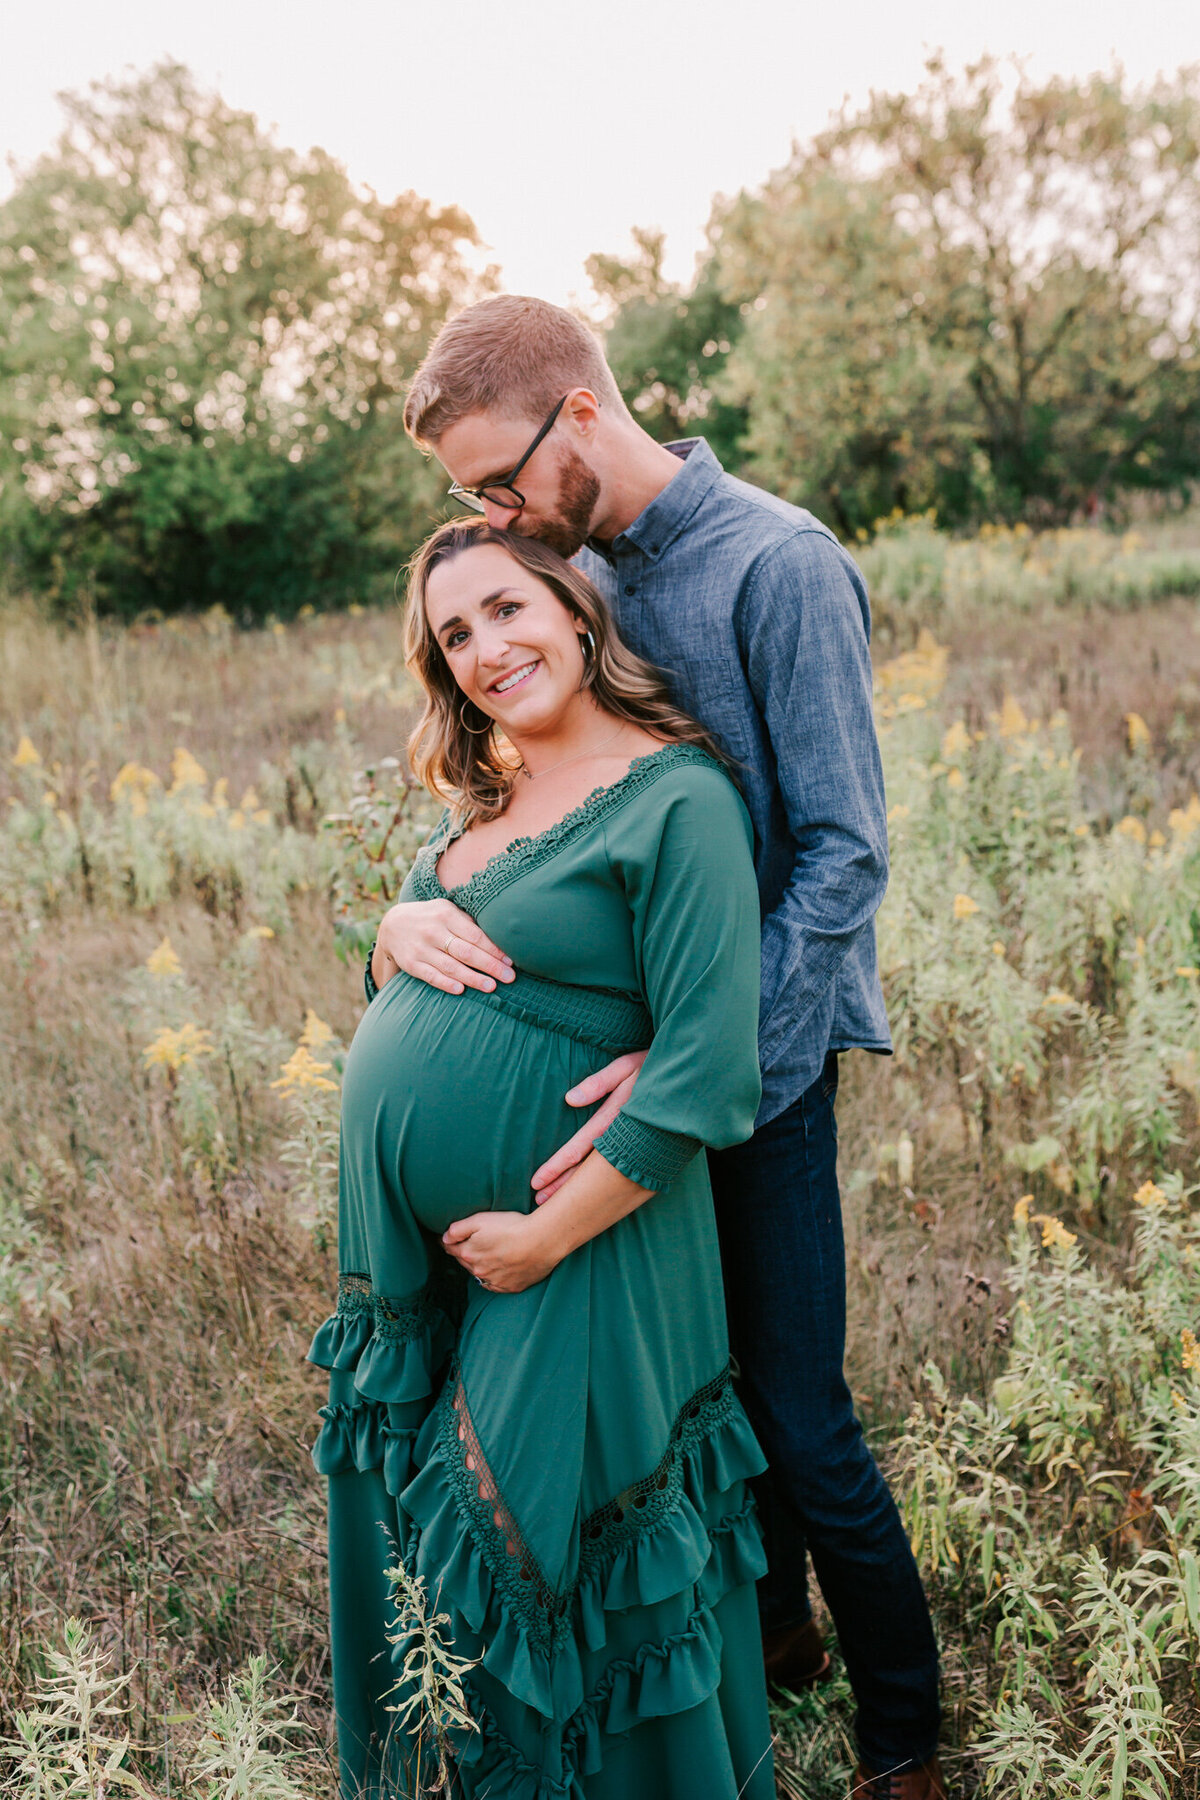 Father kisses mom on the head while in the field during her Maternity Session.